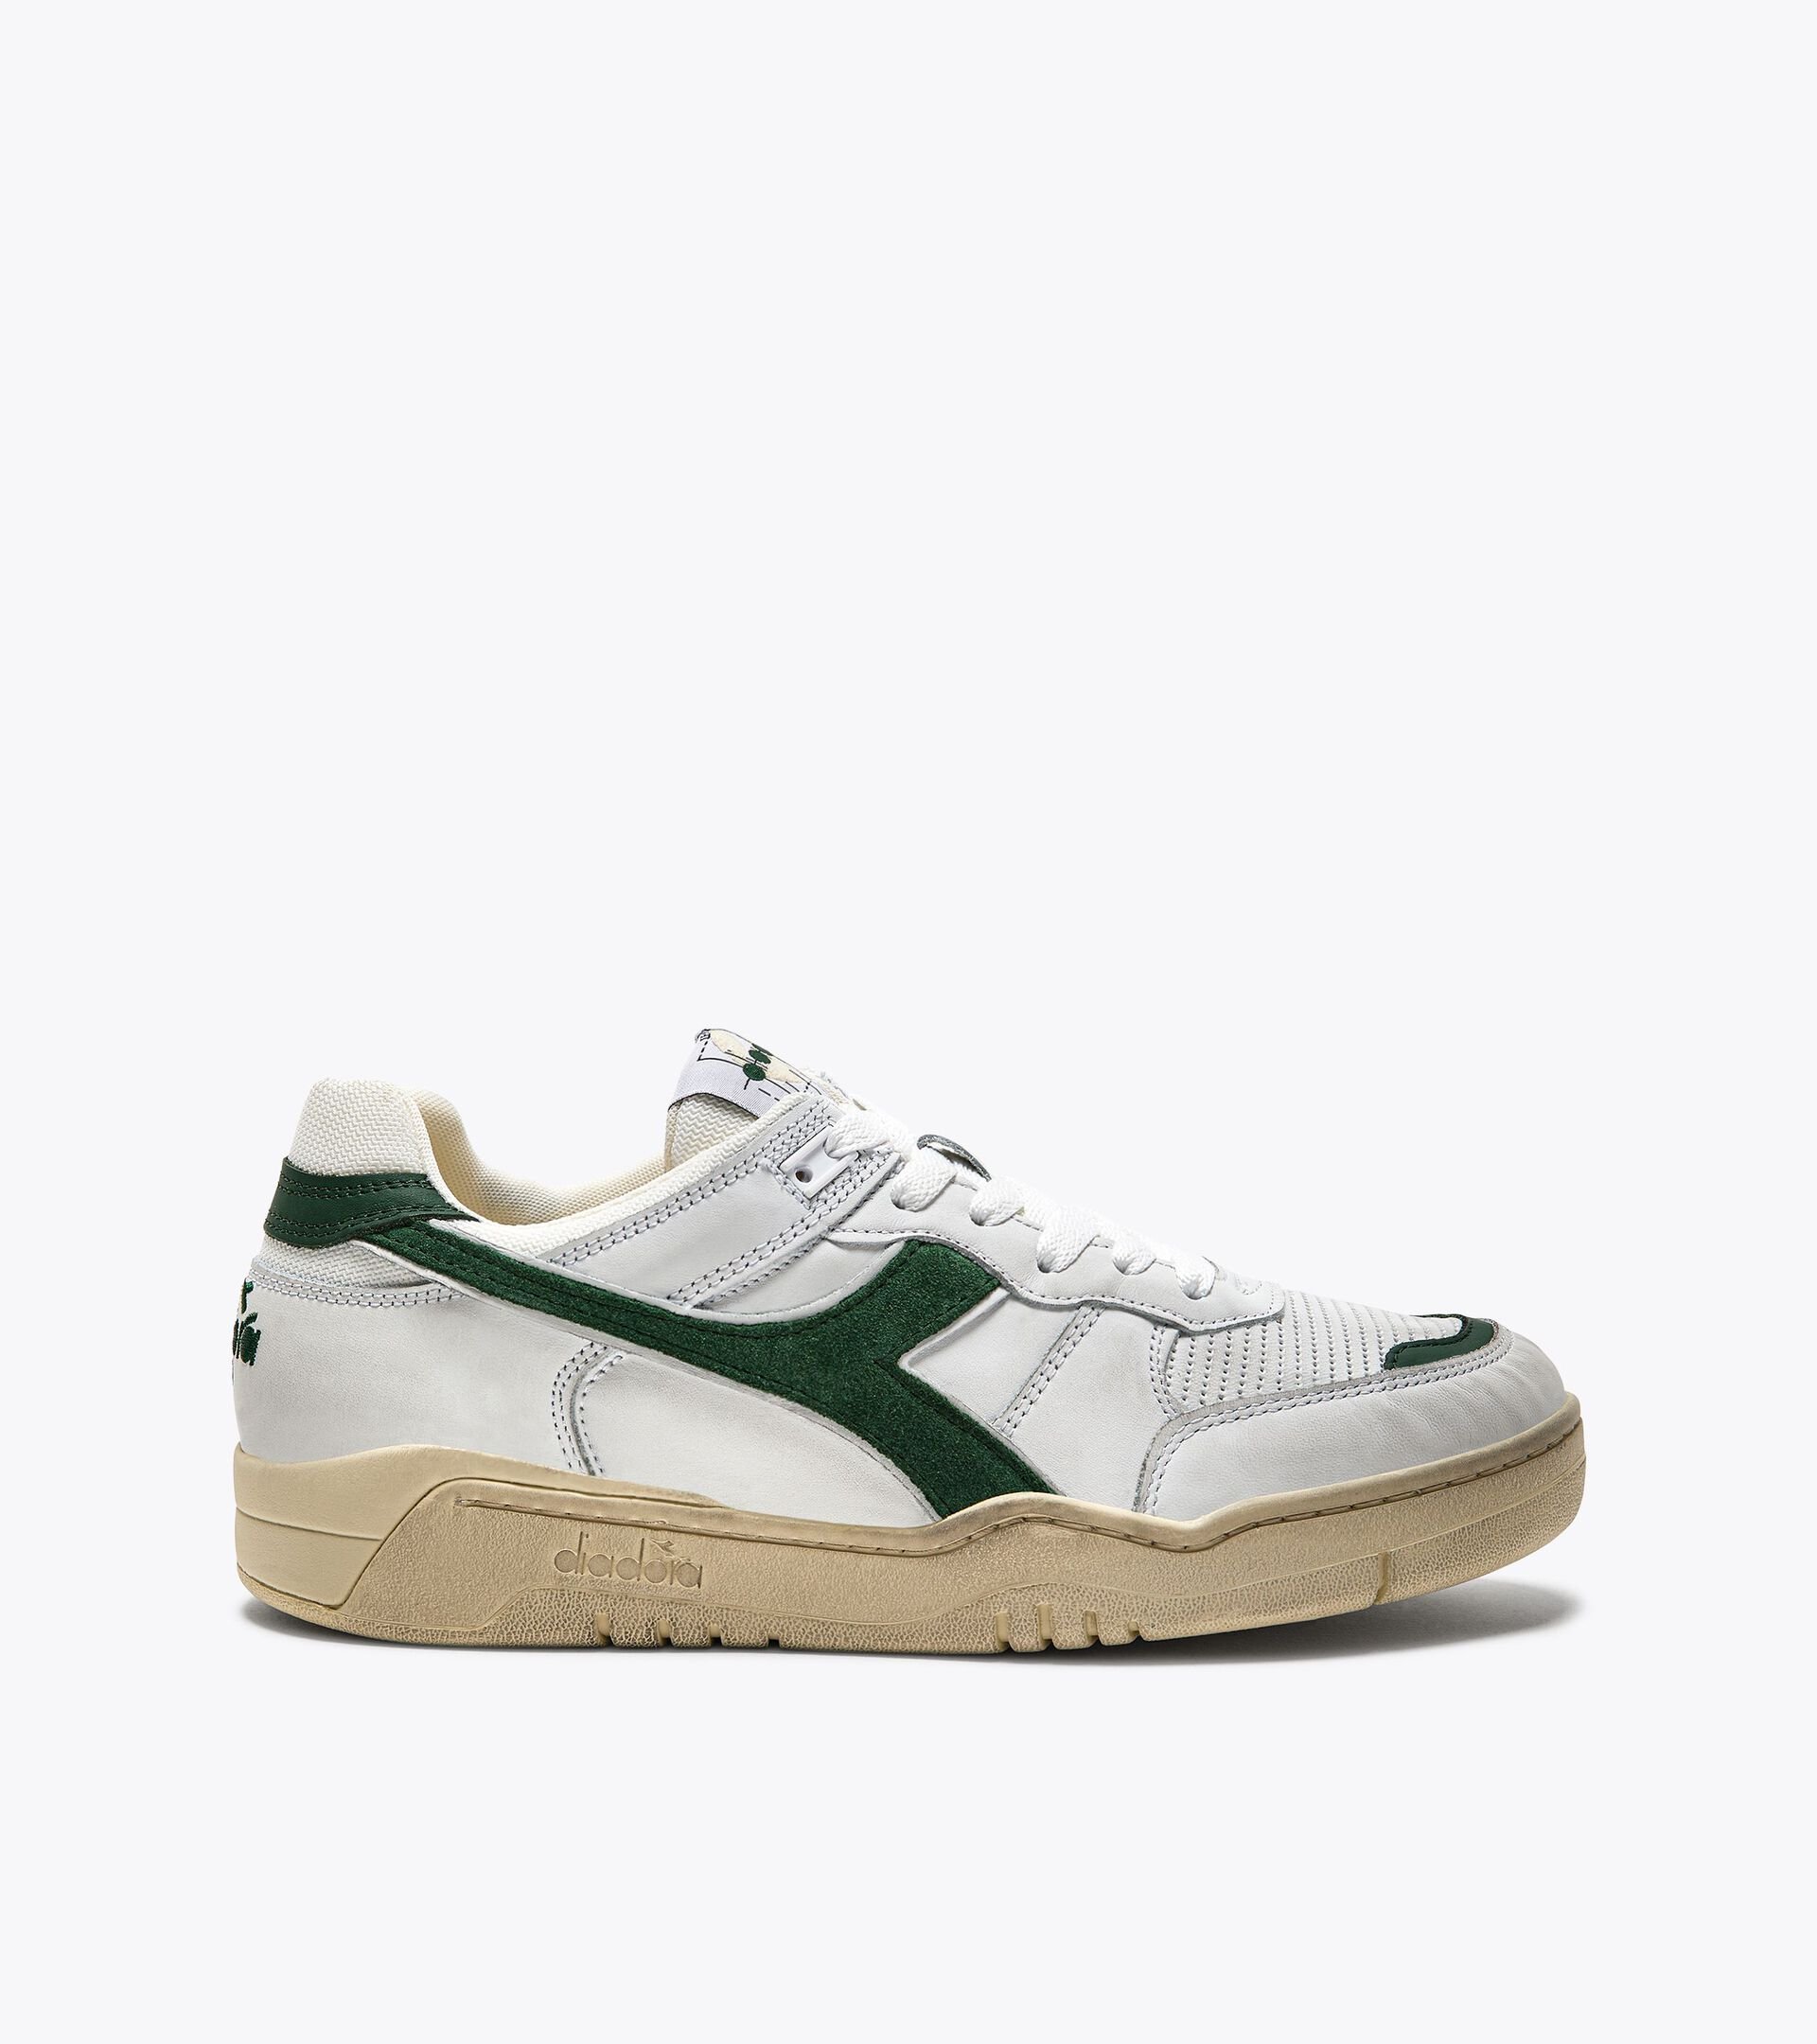 Chaussures Heritage - Gender neutral B.560 USED BLC/VERTS PATURAGES - Diadora